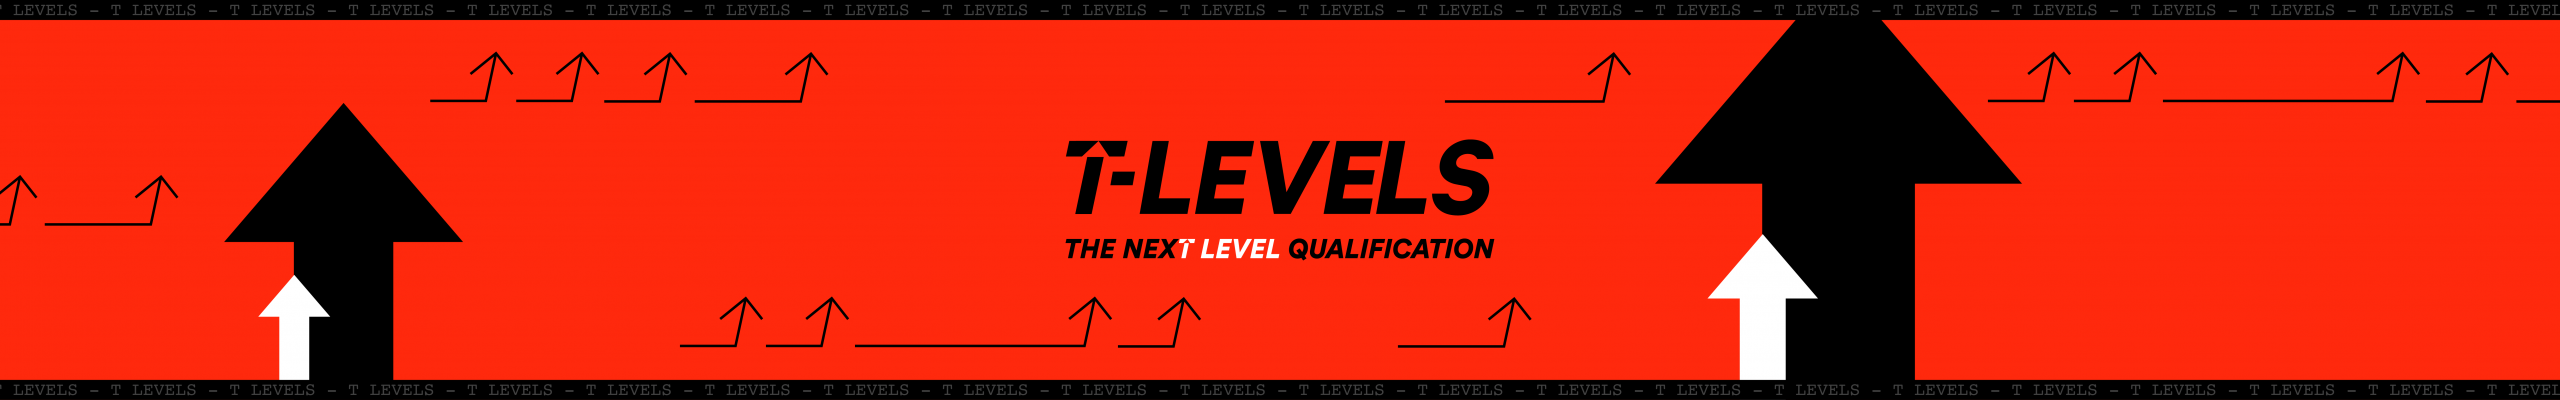 T Levels - The next level qualification